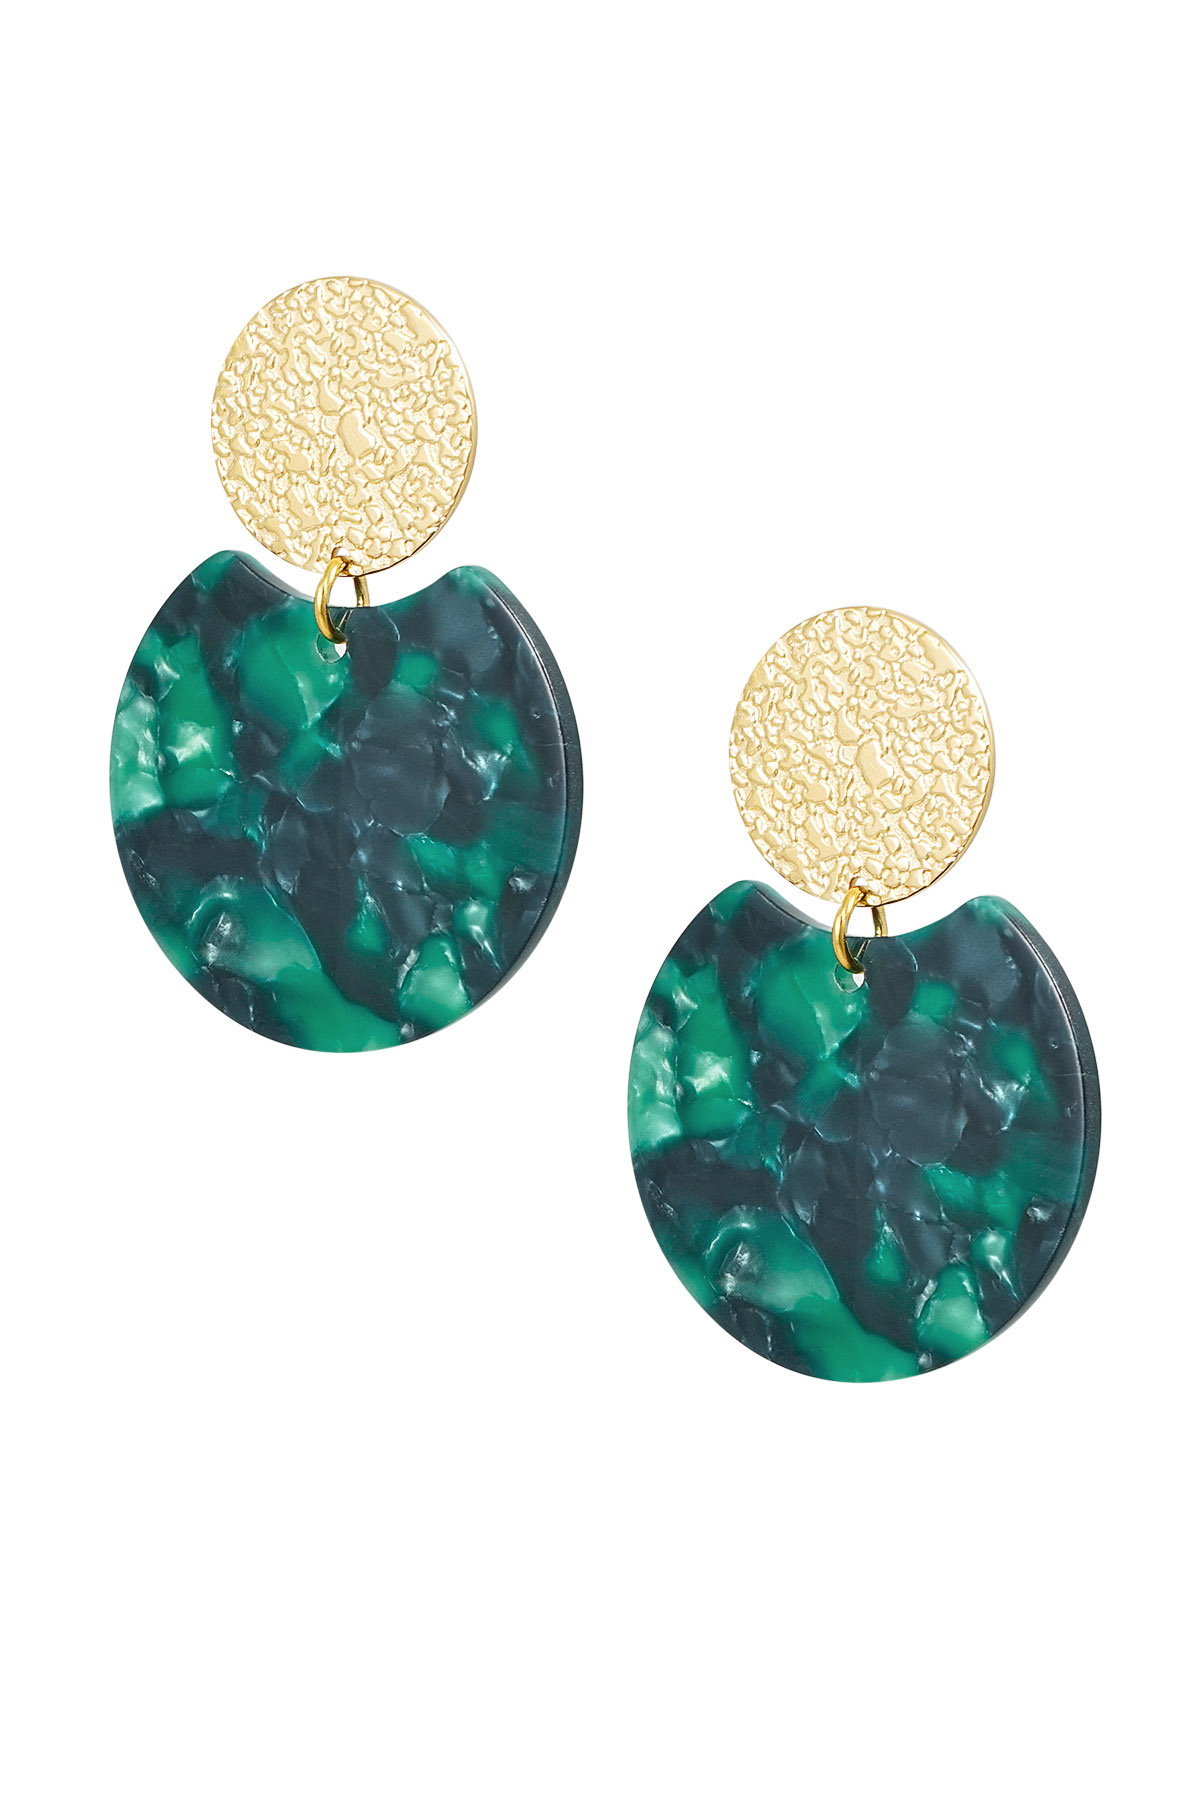 Statement earrings with colored detail - gold/green